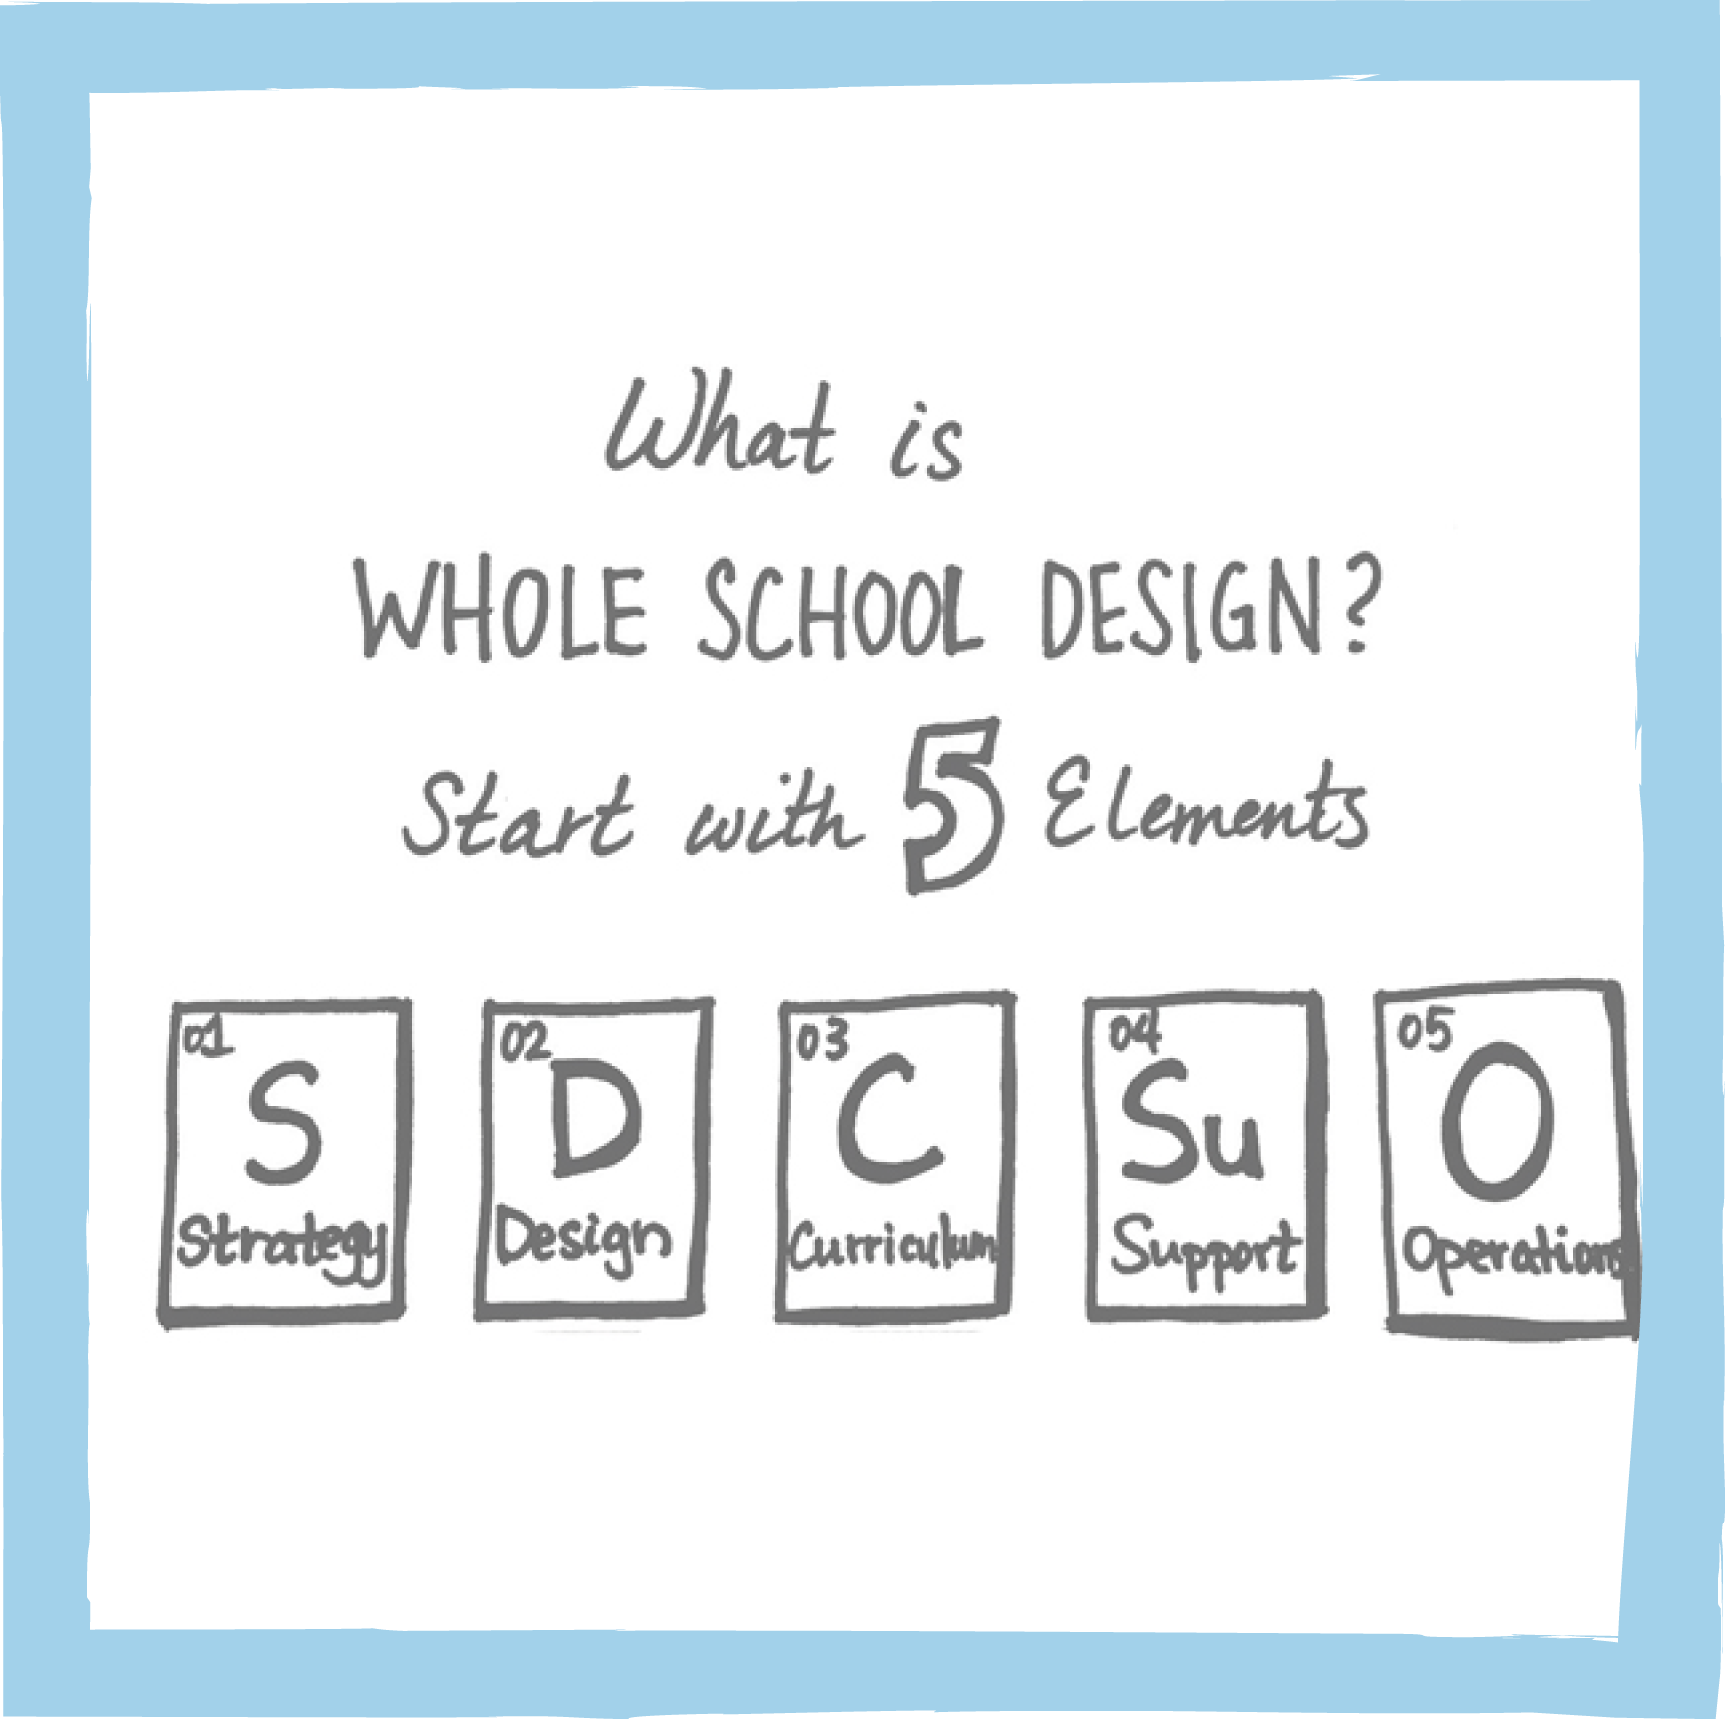 What is Whole School Design in Personalized Learning